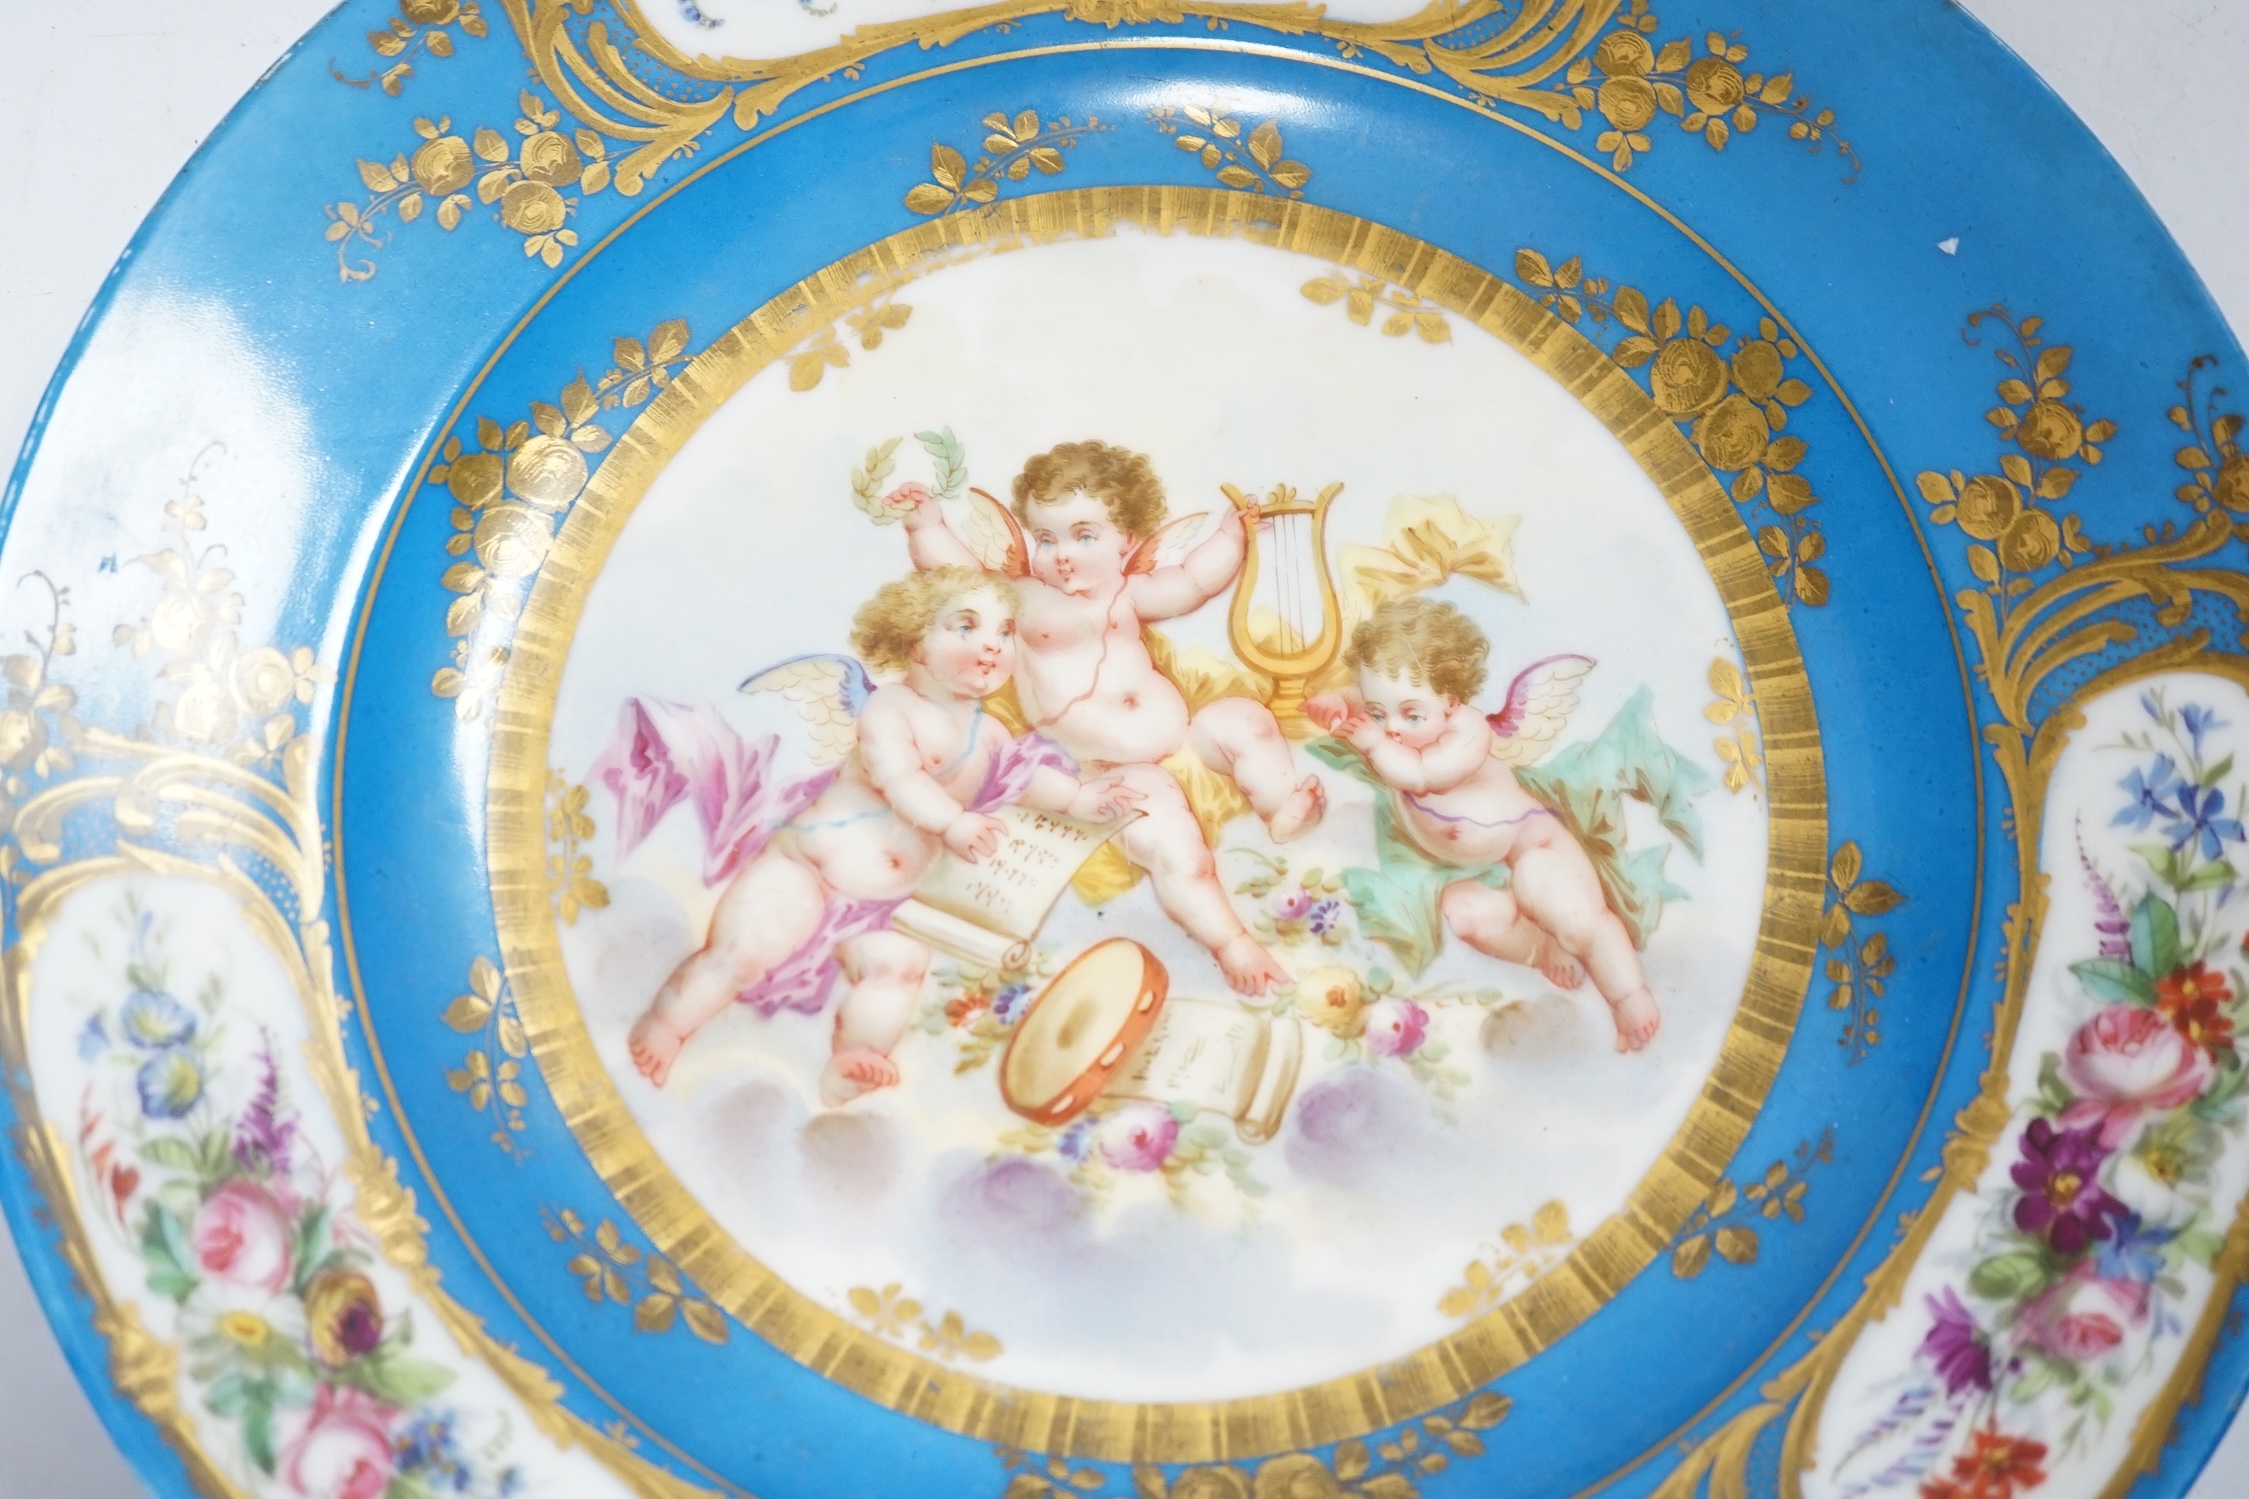 A Sevres style dish decorated with amorini, 33cm